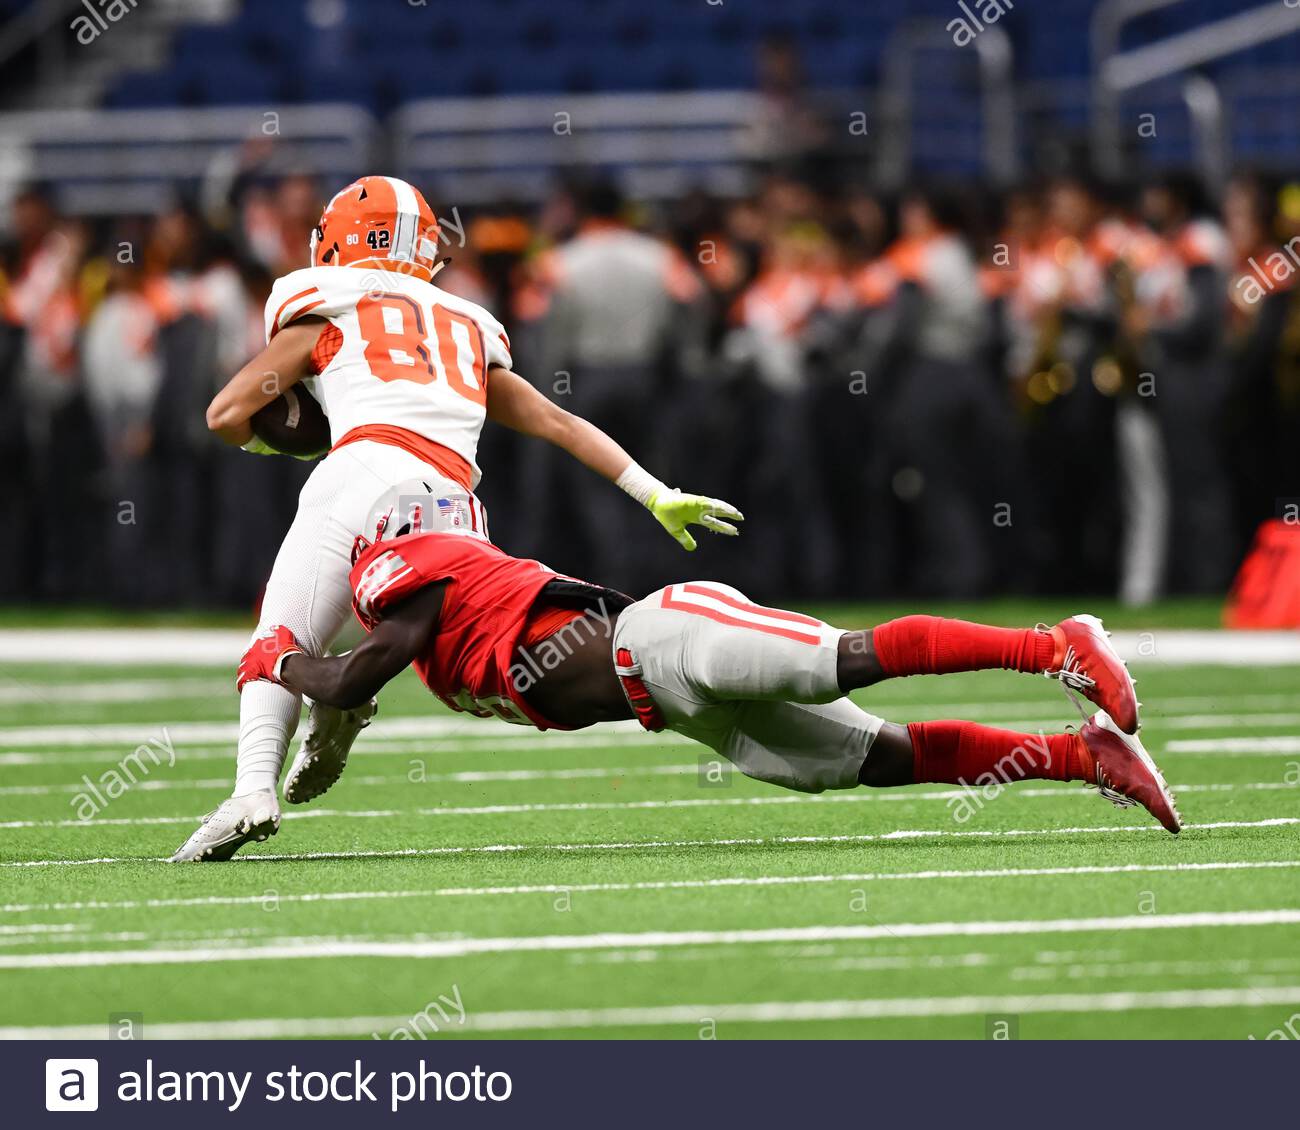 Action Photos Of High School Football Players Making Amazing Plays During A Football Game Stock Photo Alamy